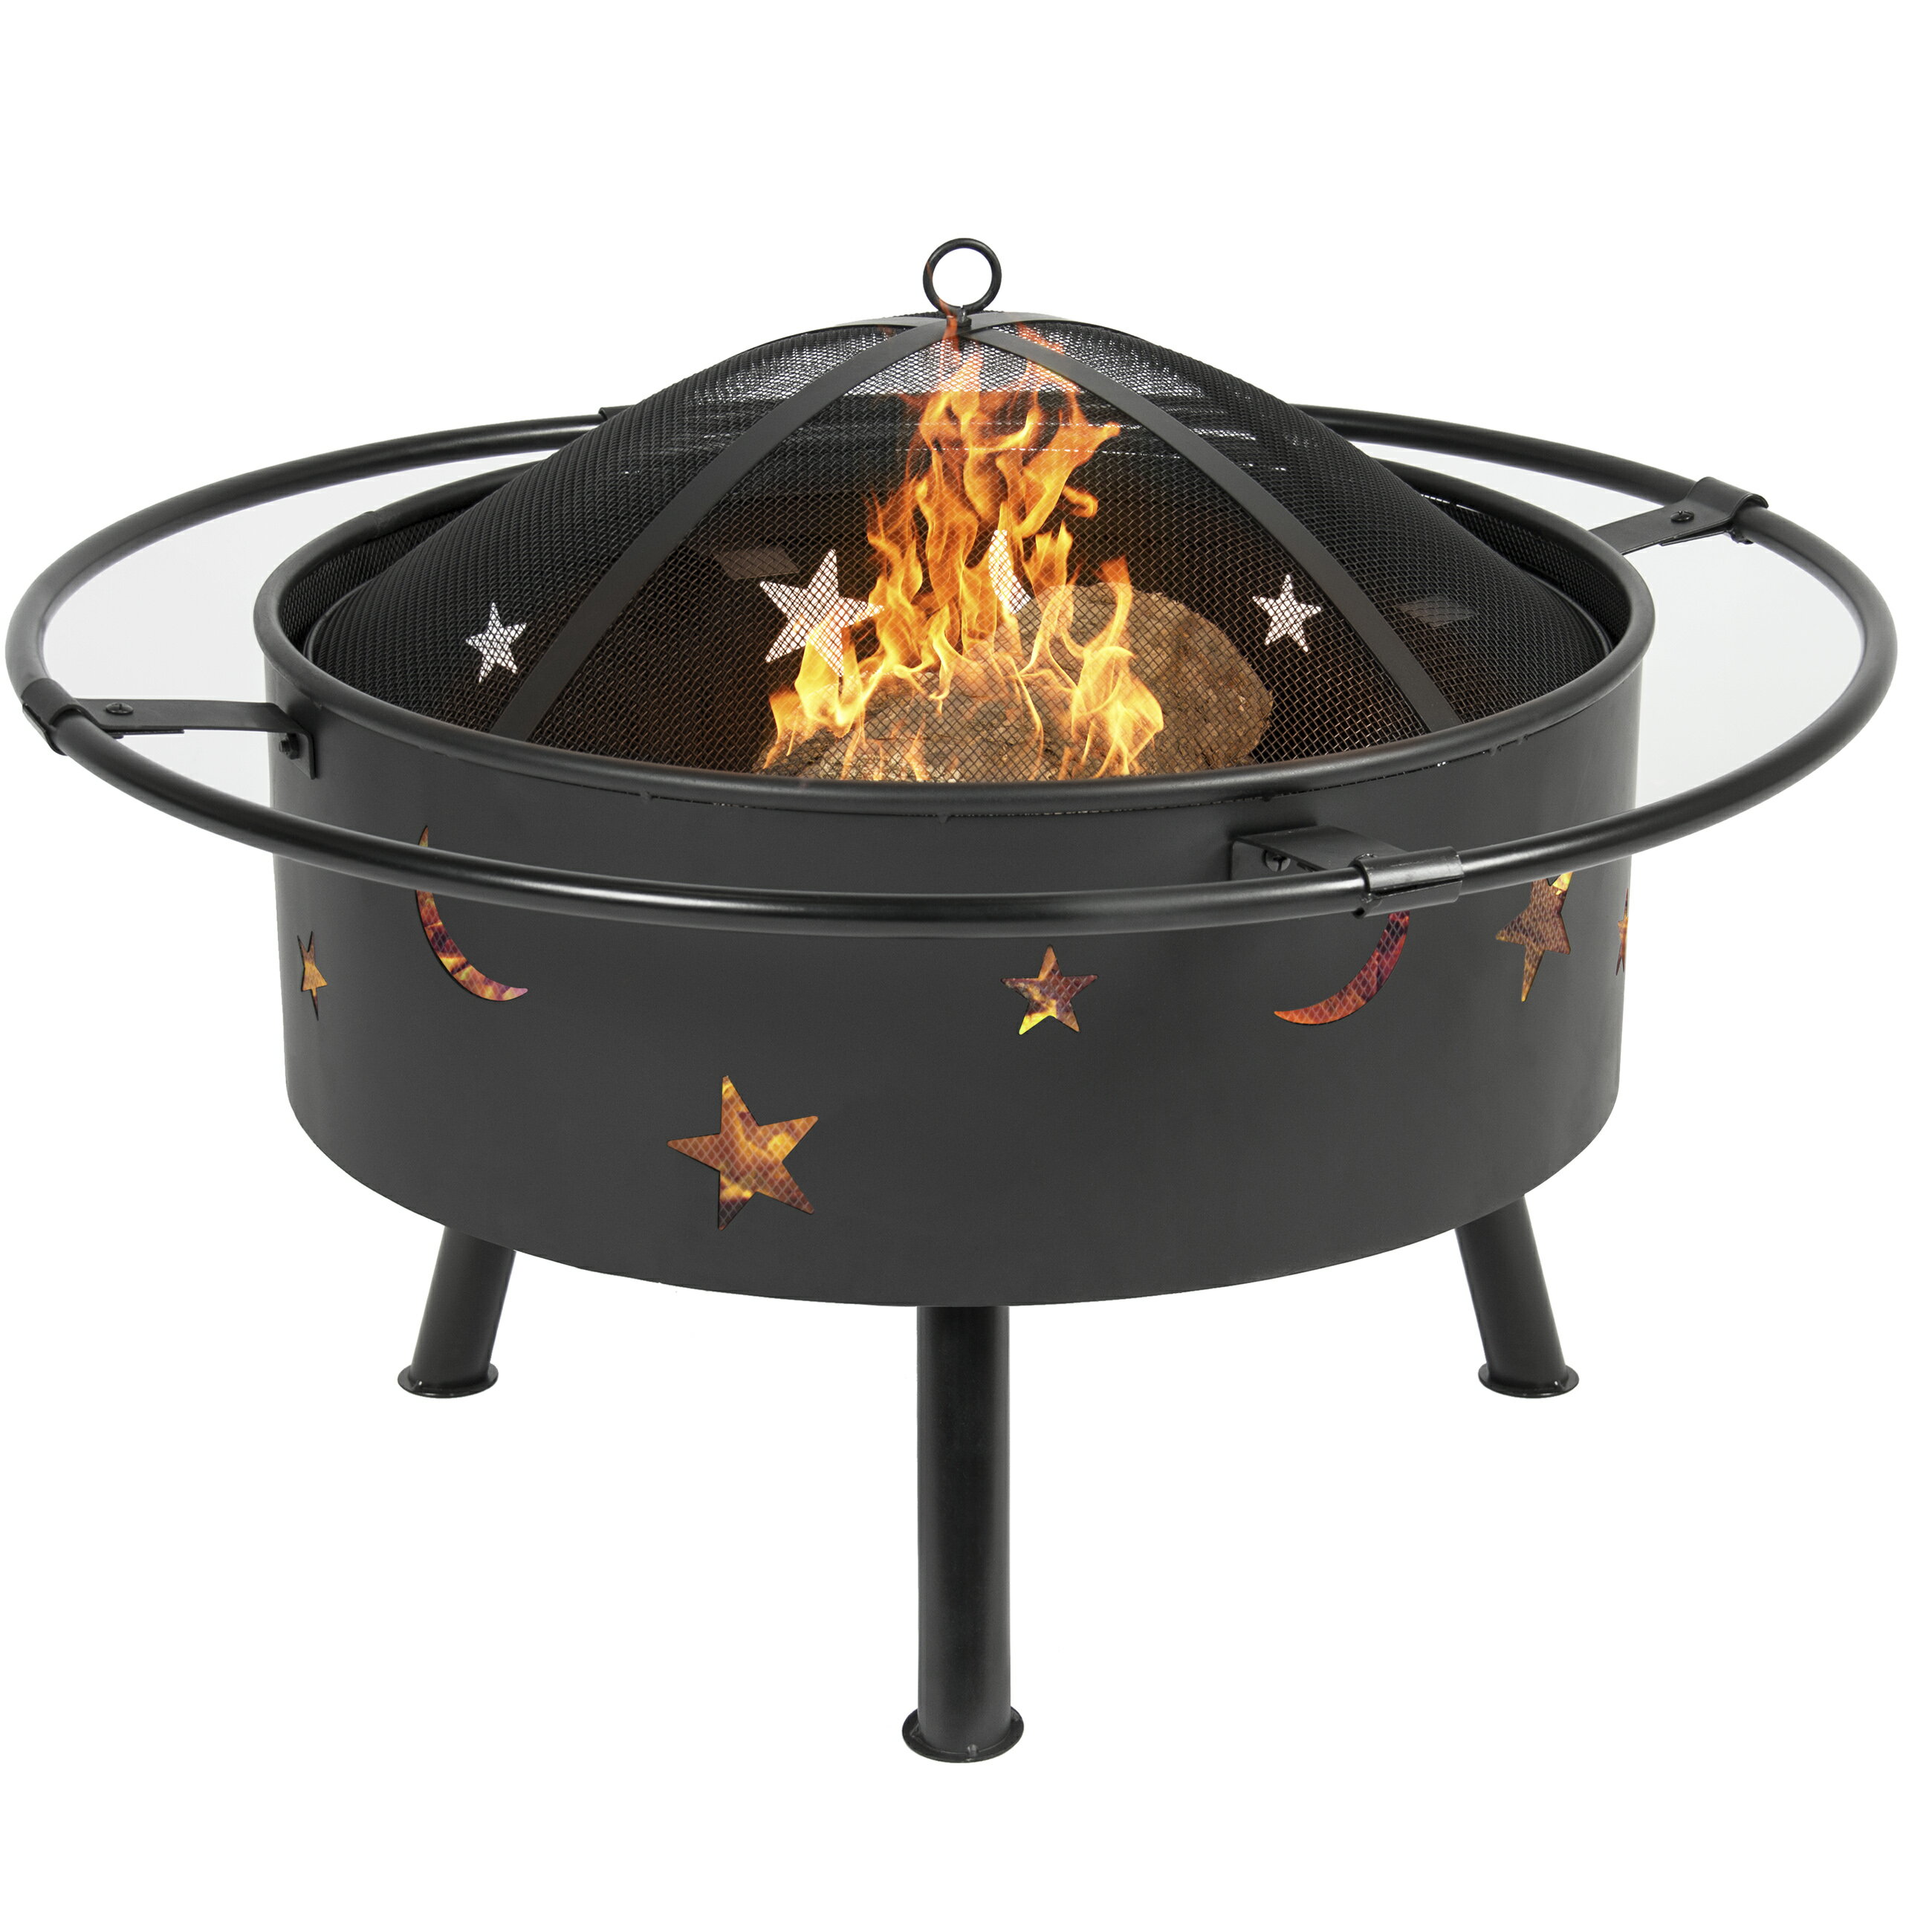 Outdoor Heating Steel Fire Pit w// Cooking Grilling Grate Backyard Patio Firepit